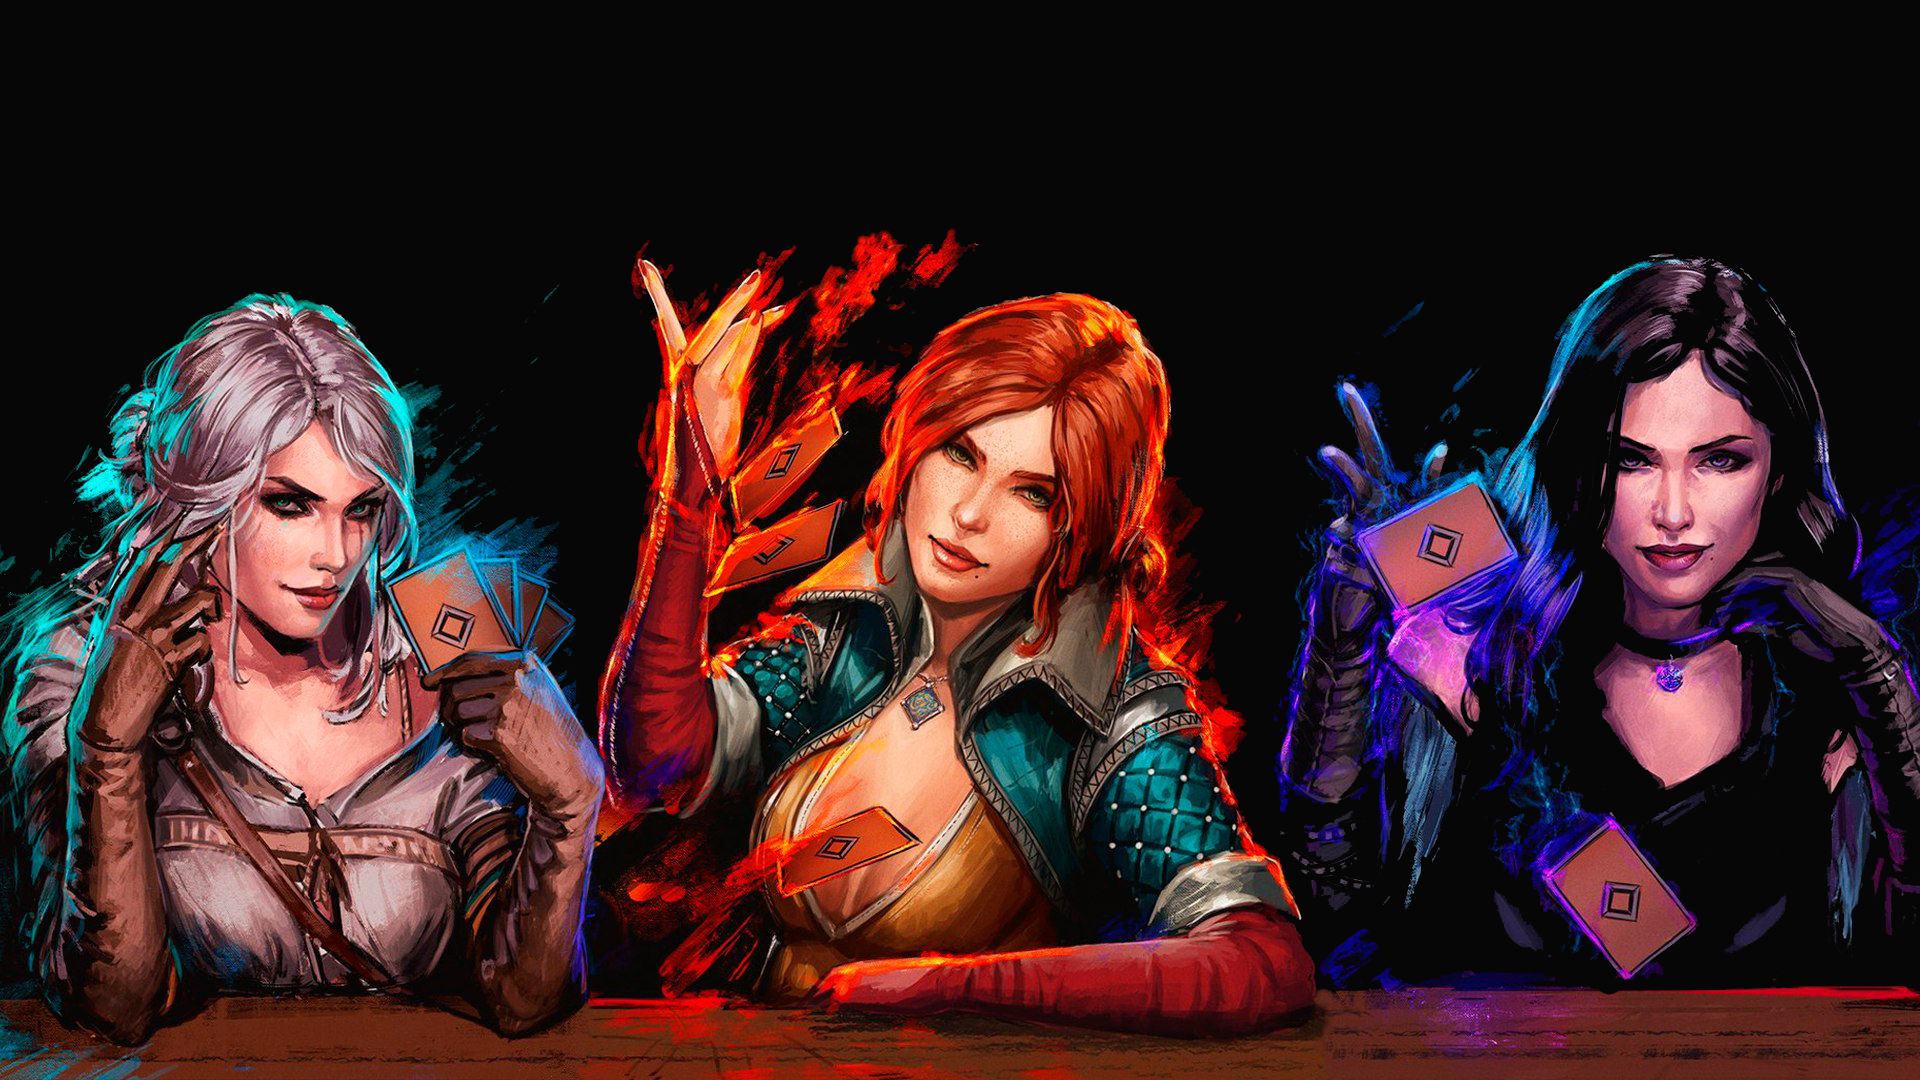 gwent__the_witcher_card_game_wallpaper_b